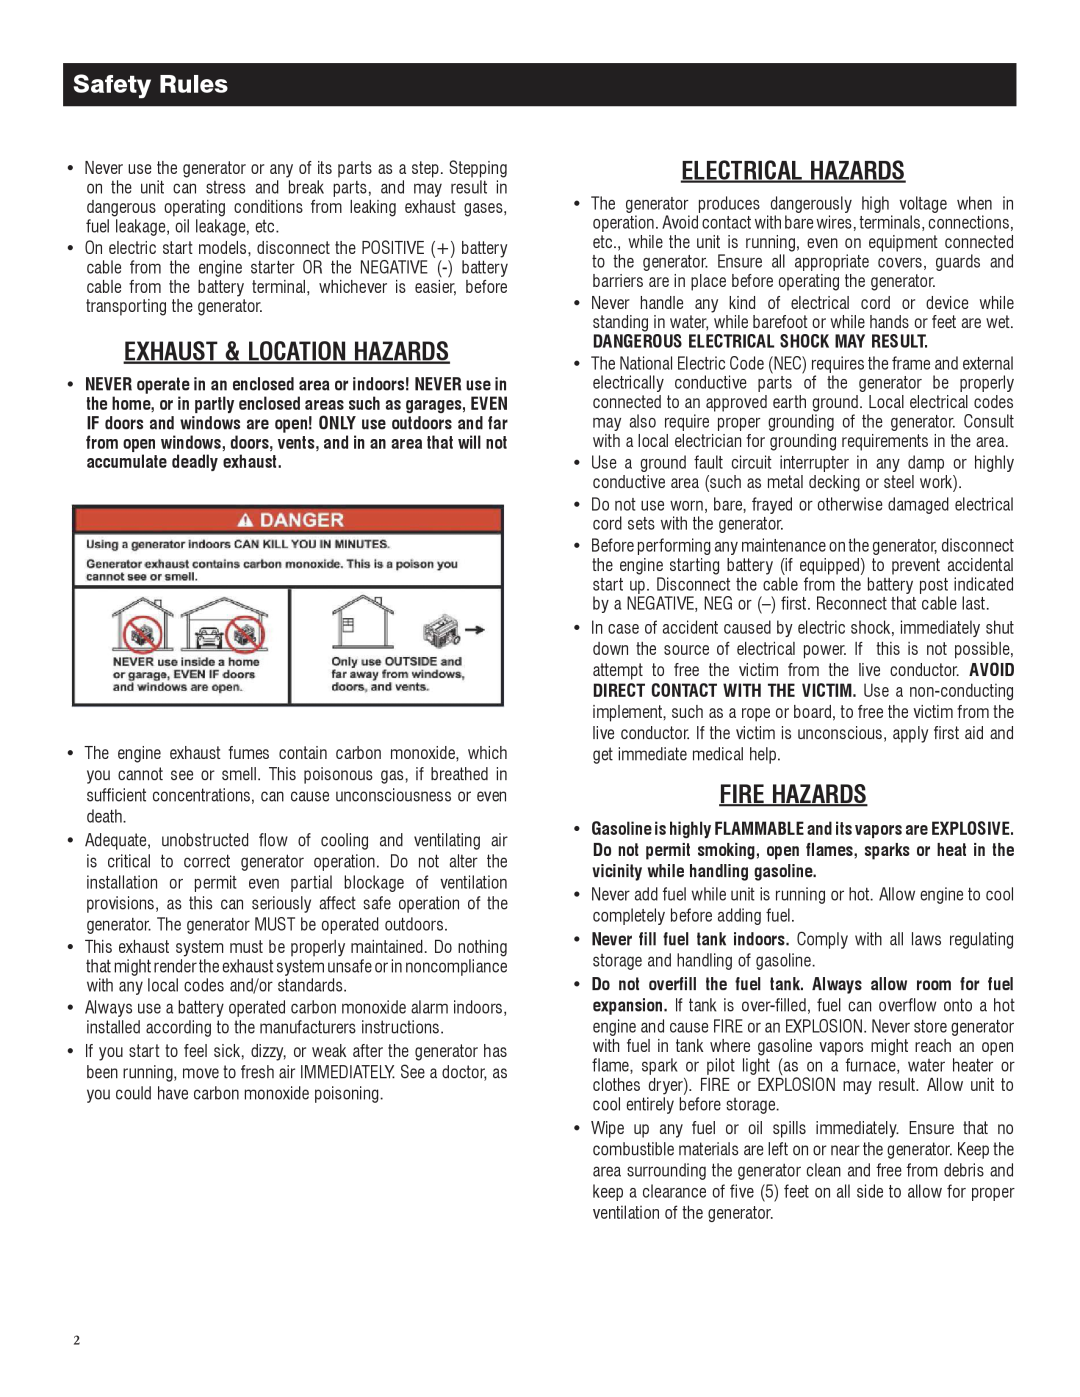 Honeywell 6039 owner manual Safety Rules, Exhaust & Location Hazards, Electrical Hazards, Fire Hazards 